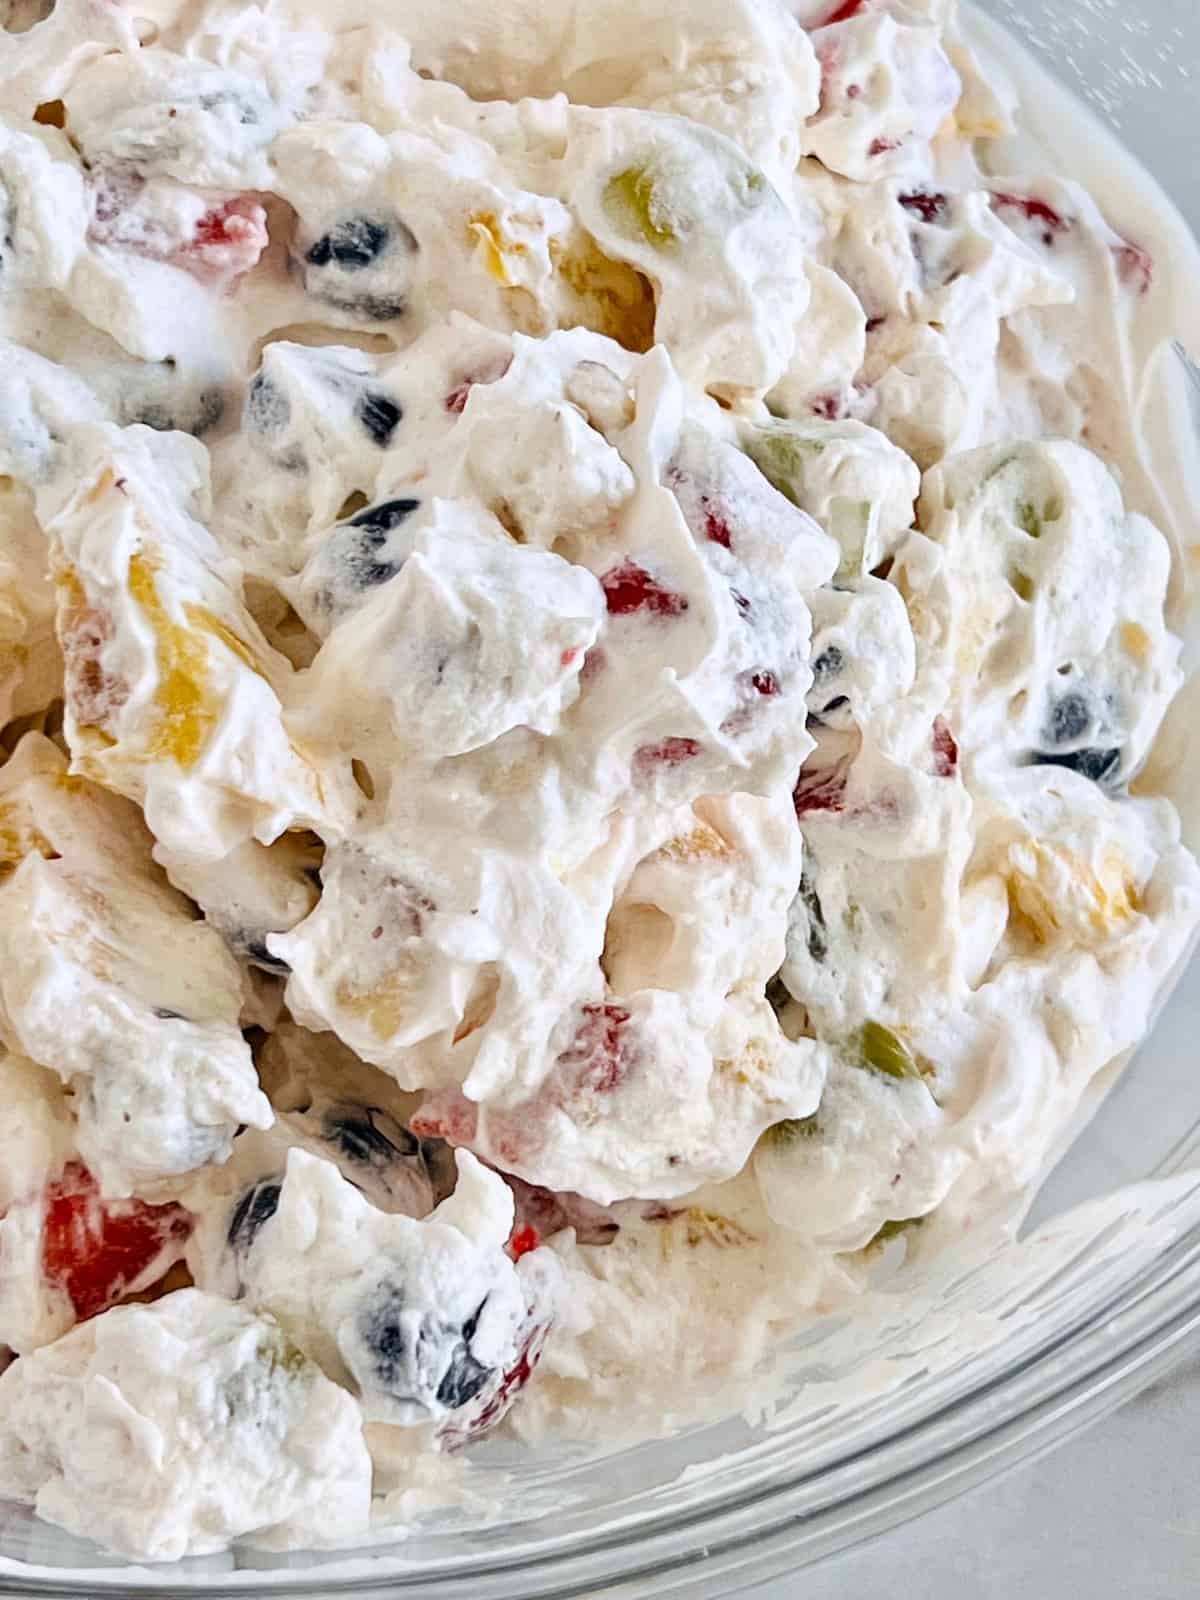 Fruit Salad with Cool Whip Closeup in glass mixing bowl.